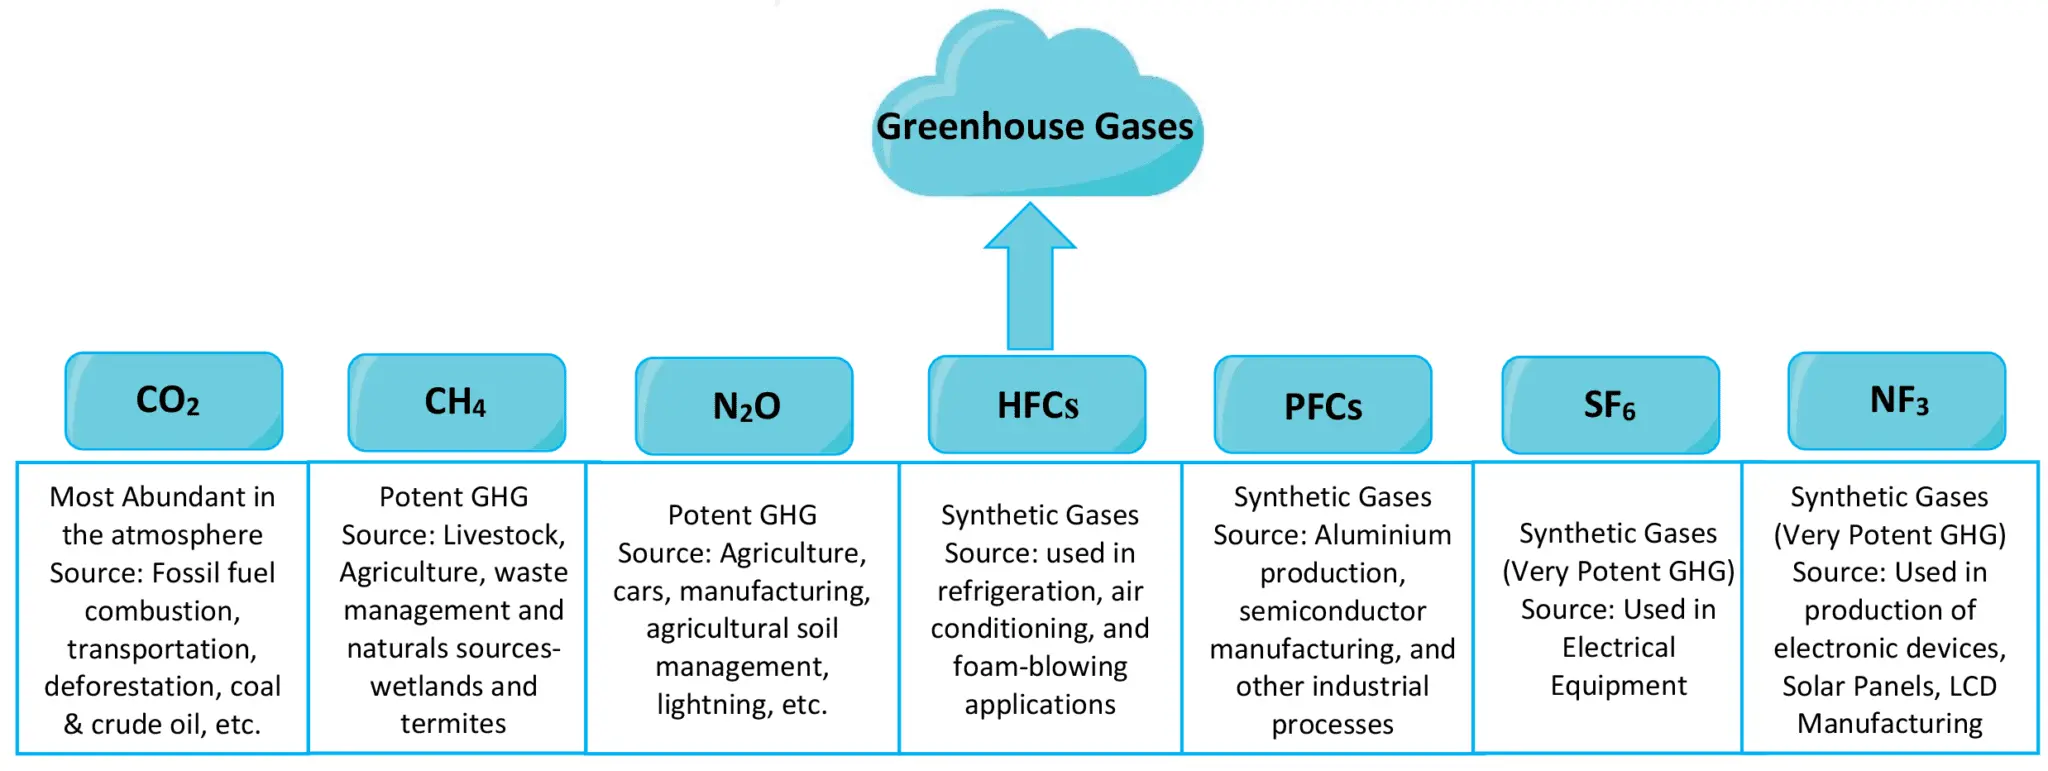 Carbon-Advisory-services Greenhouse Gas Emissions